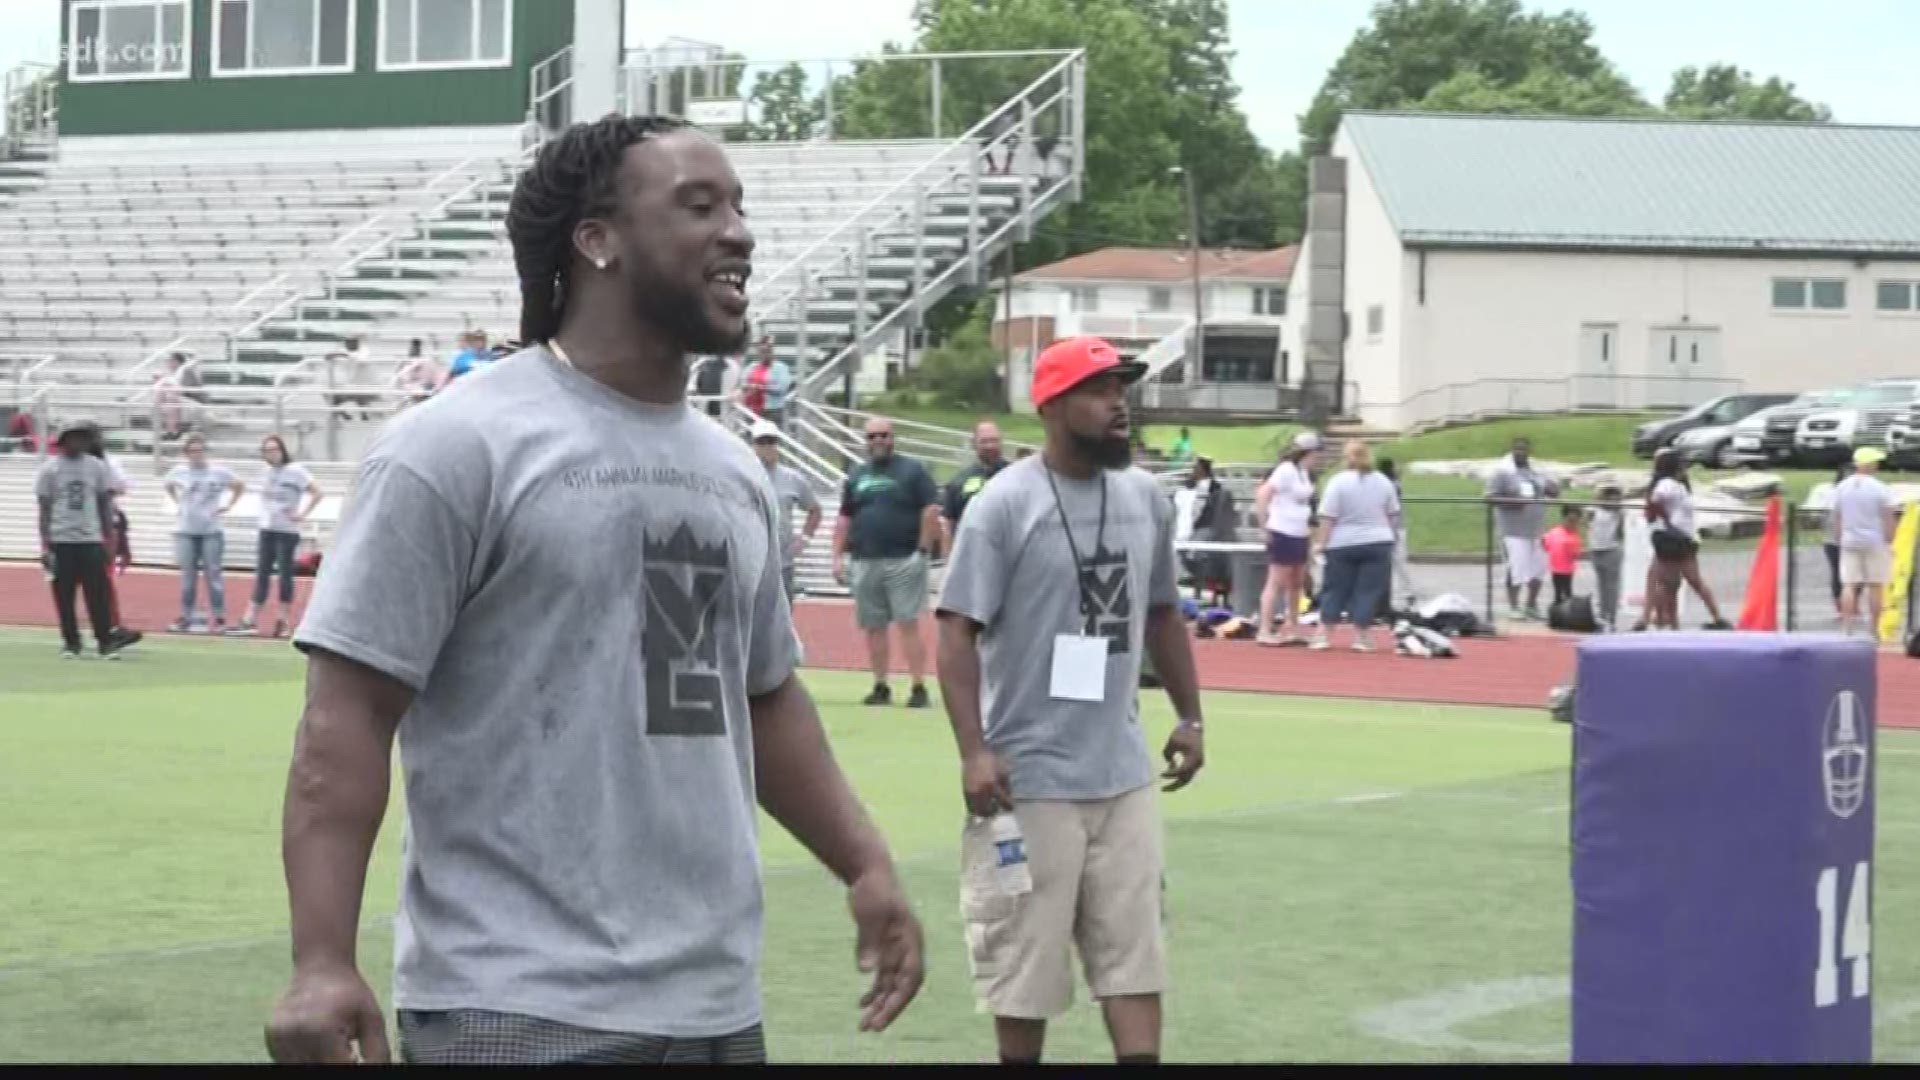 Markus Golden, the New York Giants defensive end from Affton, was out encouraging kids to chase their dreams -- because he used to be in their shoes not too long ago.